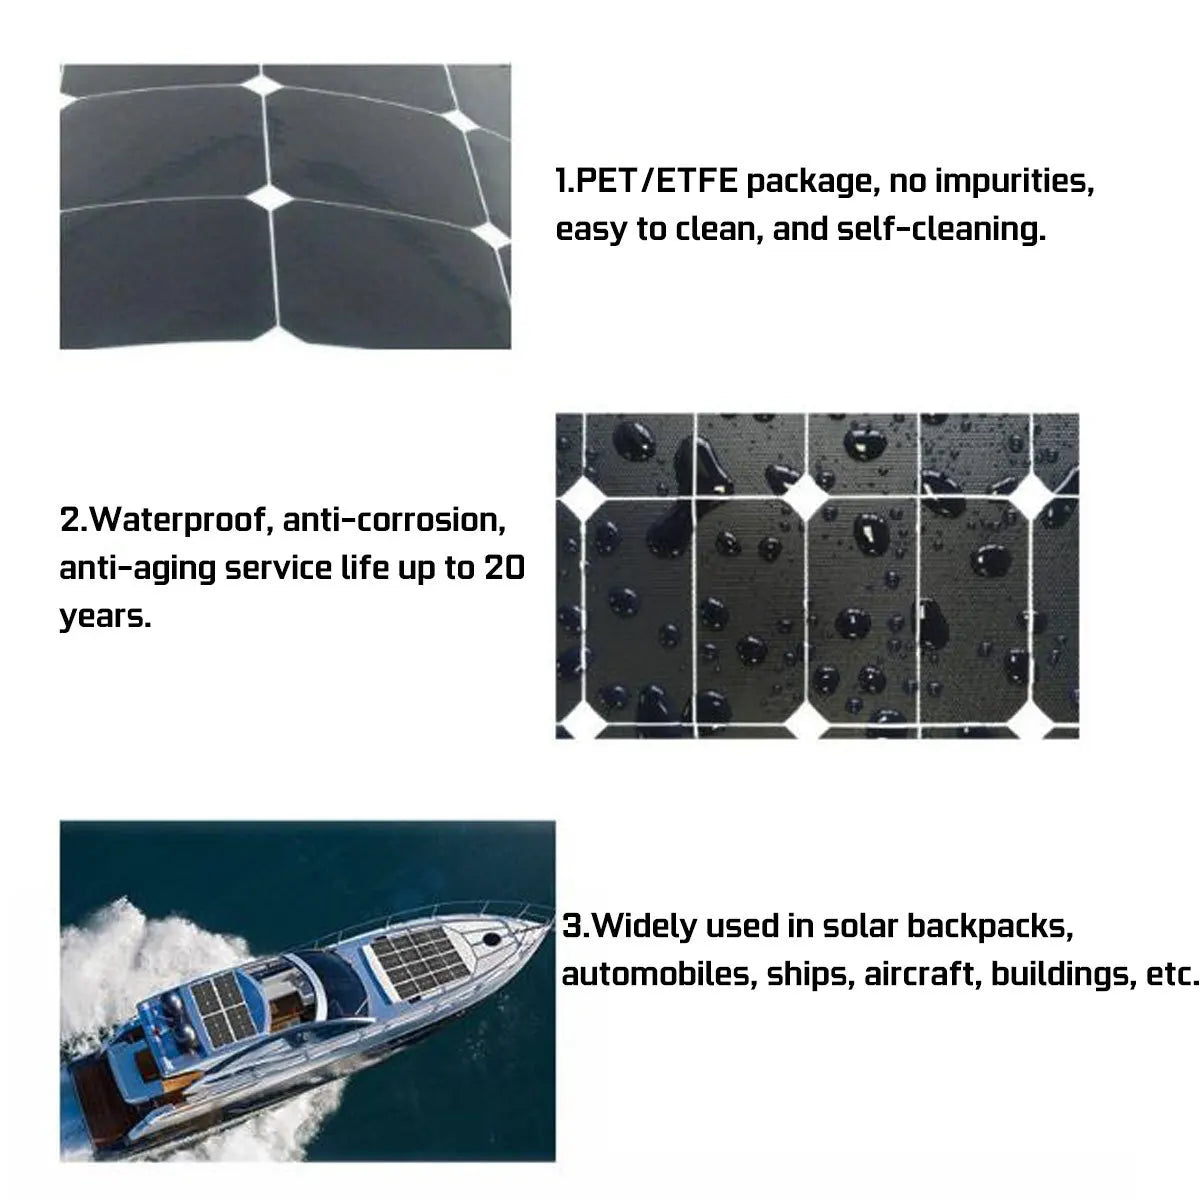 1000W Inverter  Solar Panel, Waterproof, durable package with self-cleaning properties for long-lasting use.